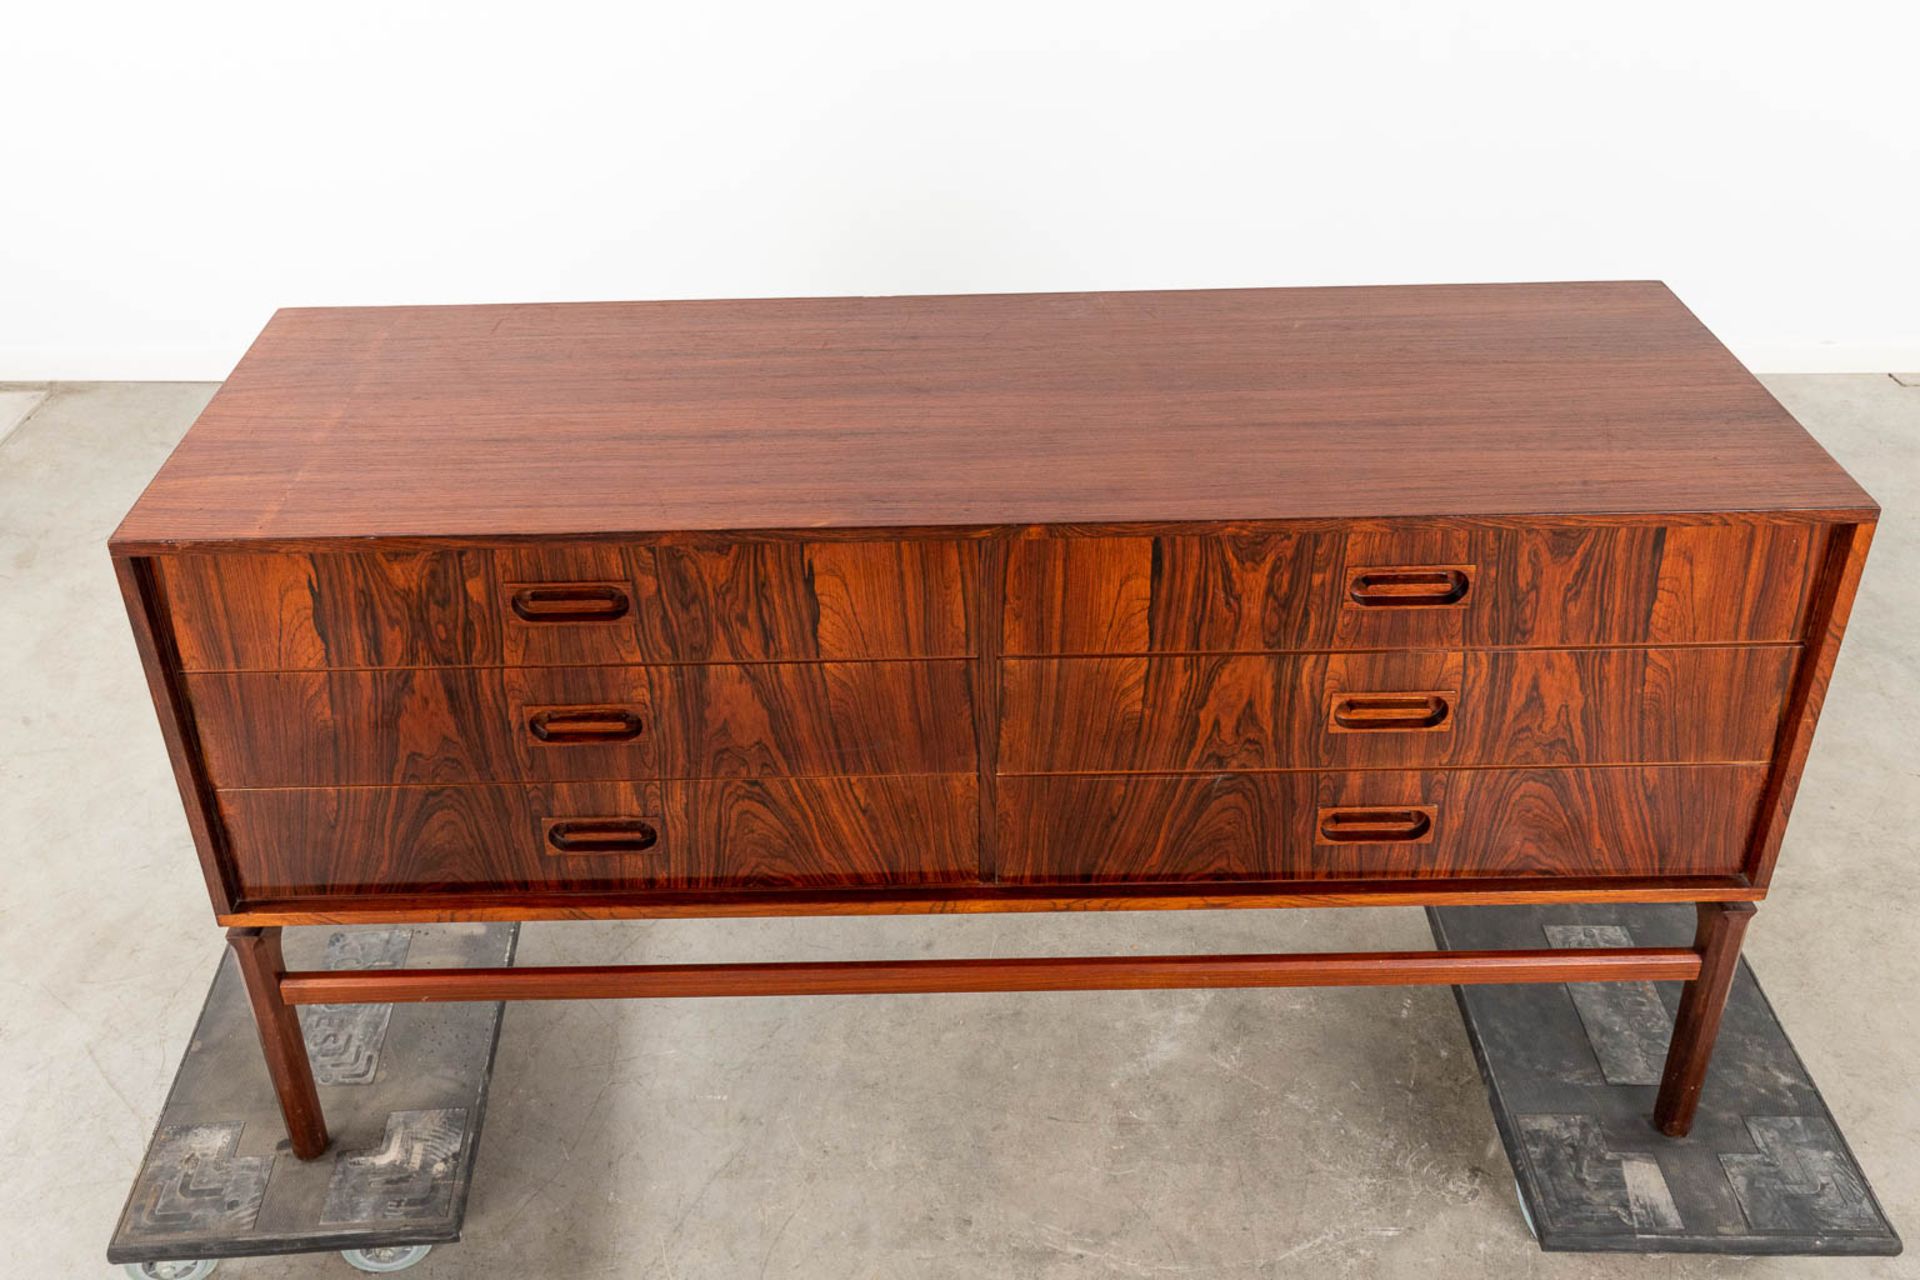 A mid-century Scandinavian Sideboard with 6 drawers, and rosewood veneer. (D:45 x W:150 x H:80 cm) - Image 12 of 12